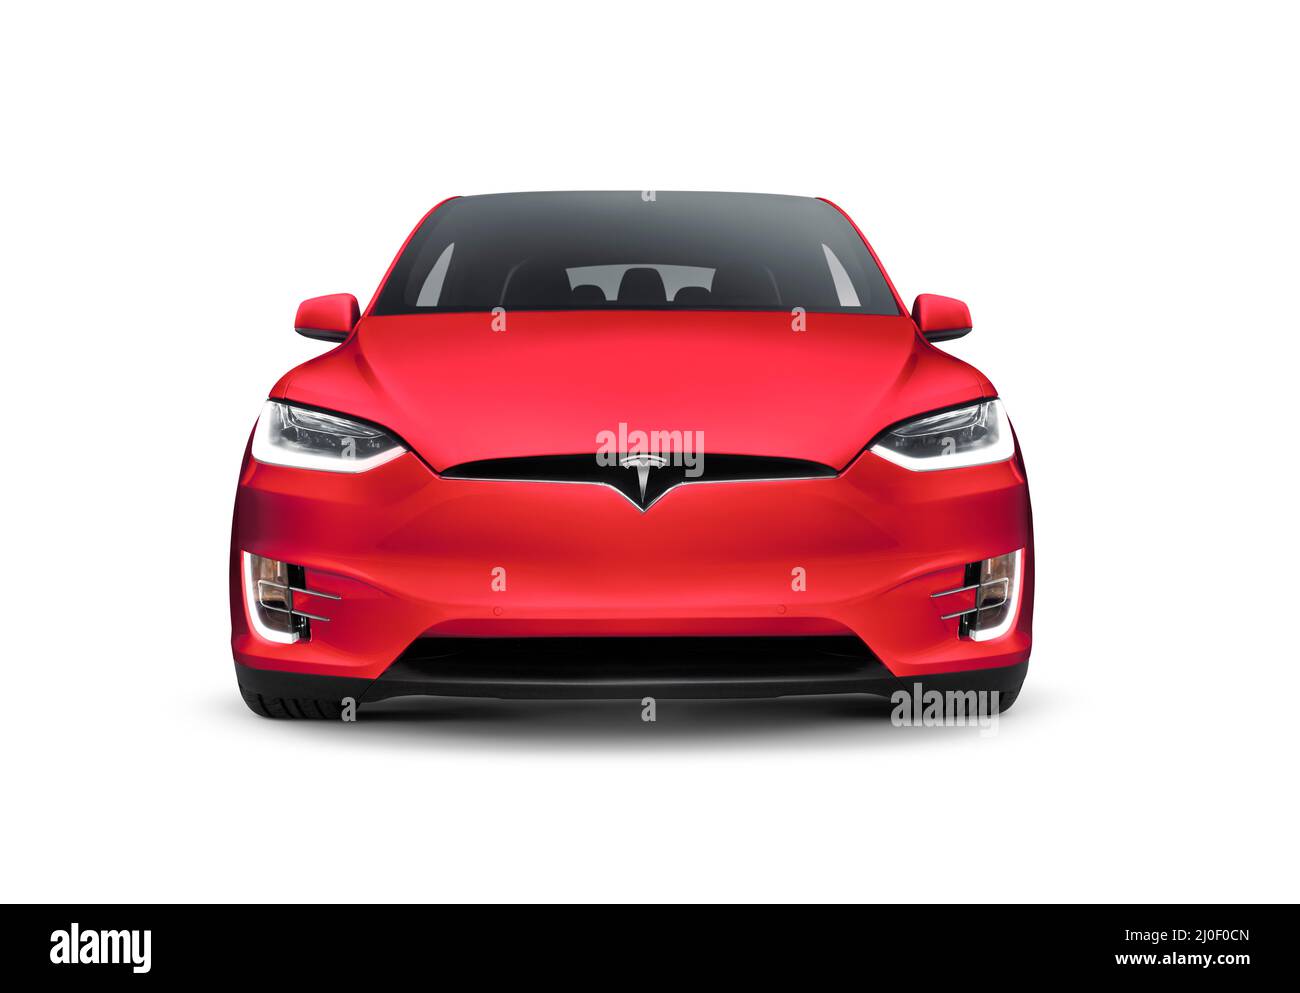 License and prints at MaximImages.com - Tesla luxury electric car, automotive stock photo. Stock Photo